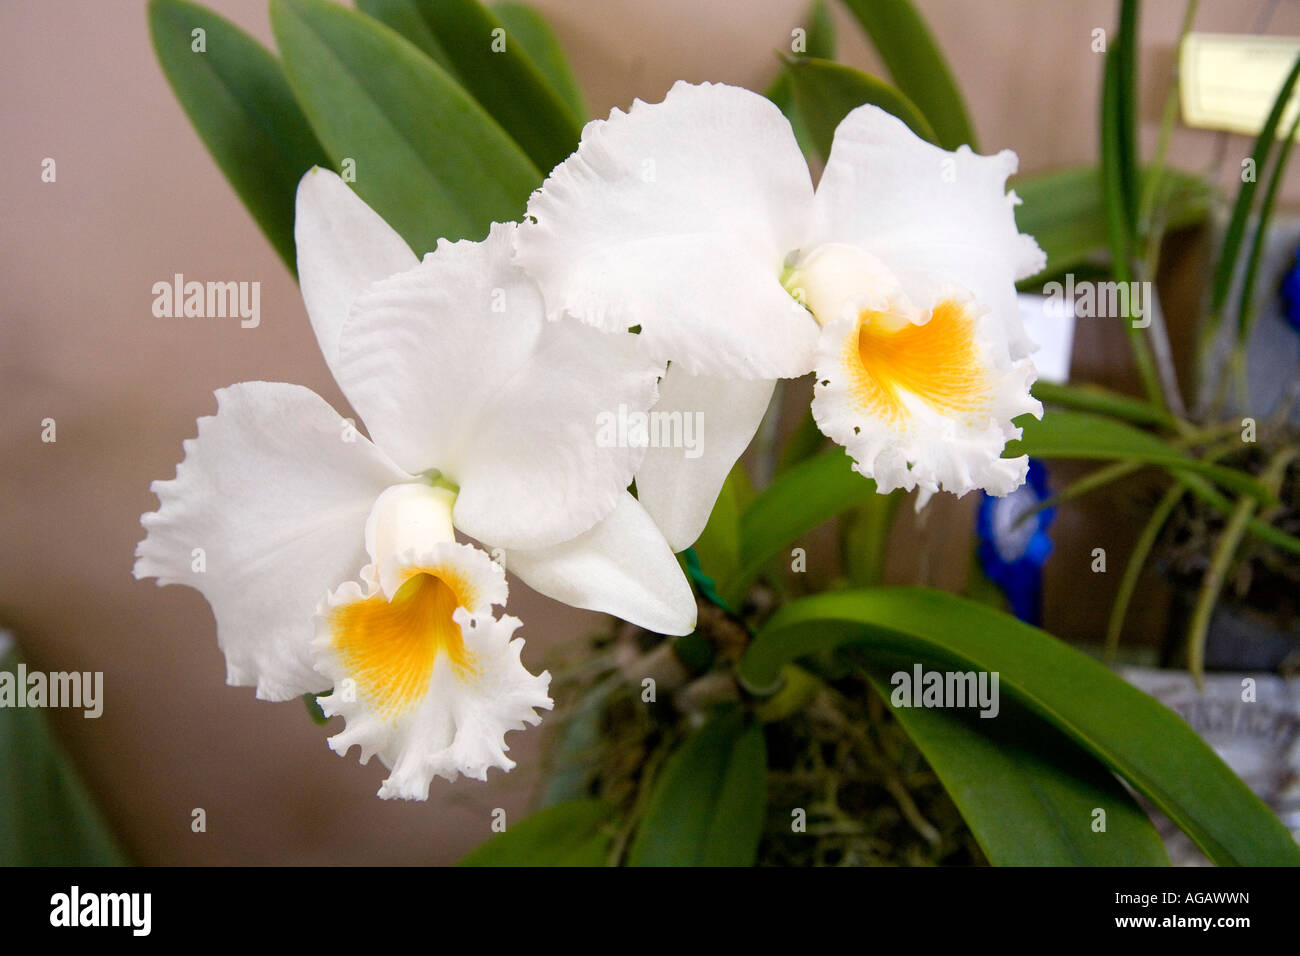 Cattleya Bow Bells orchids seen at Panama Central America Stock Photo